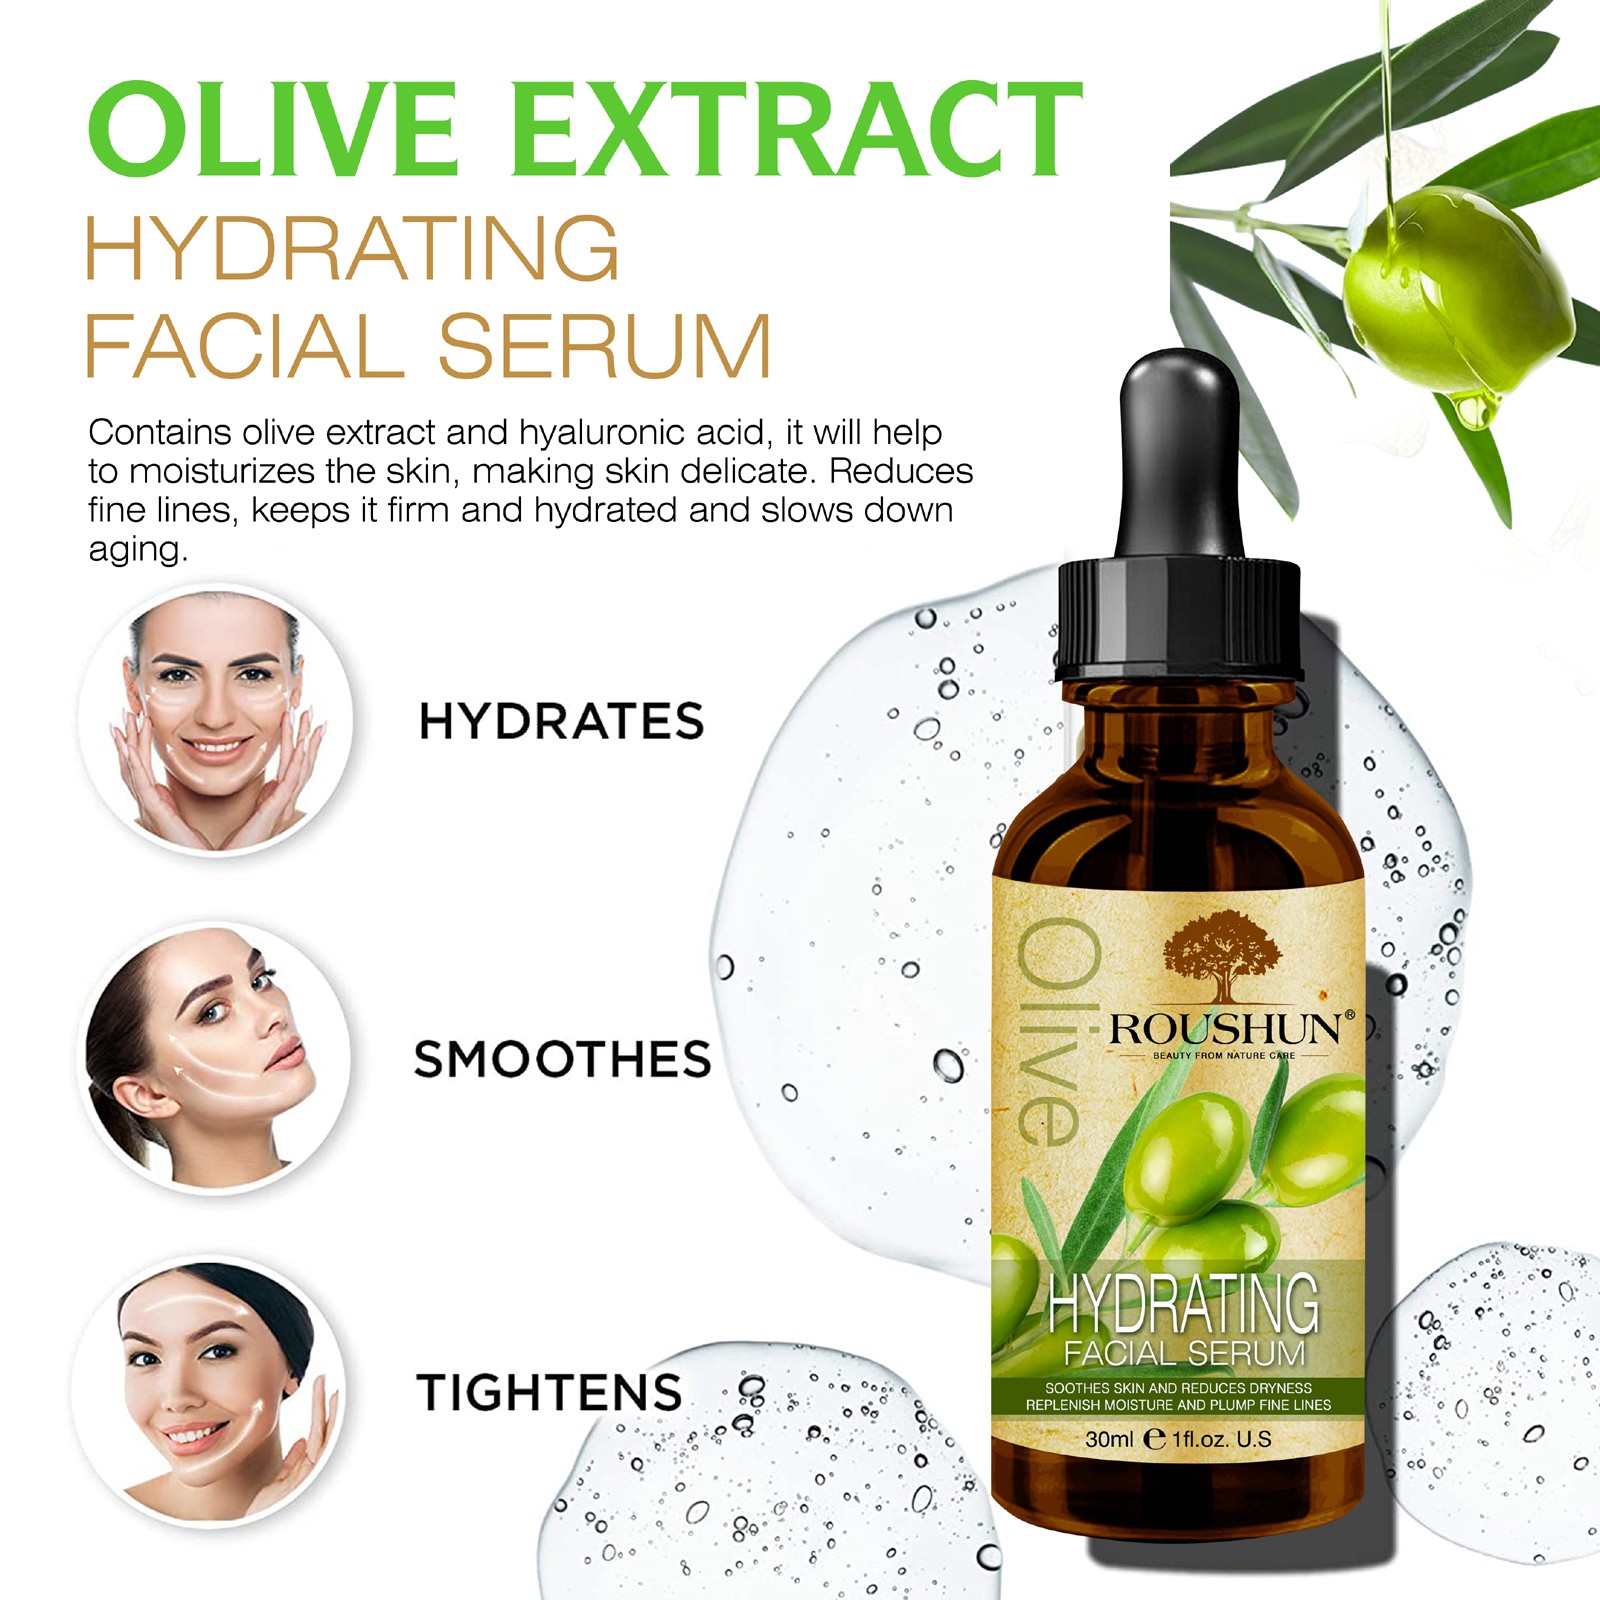 ROUSHUN Olive Hydrating Facial Serum Soothes Skin And Reduces Dryness Replenish Moisture 